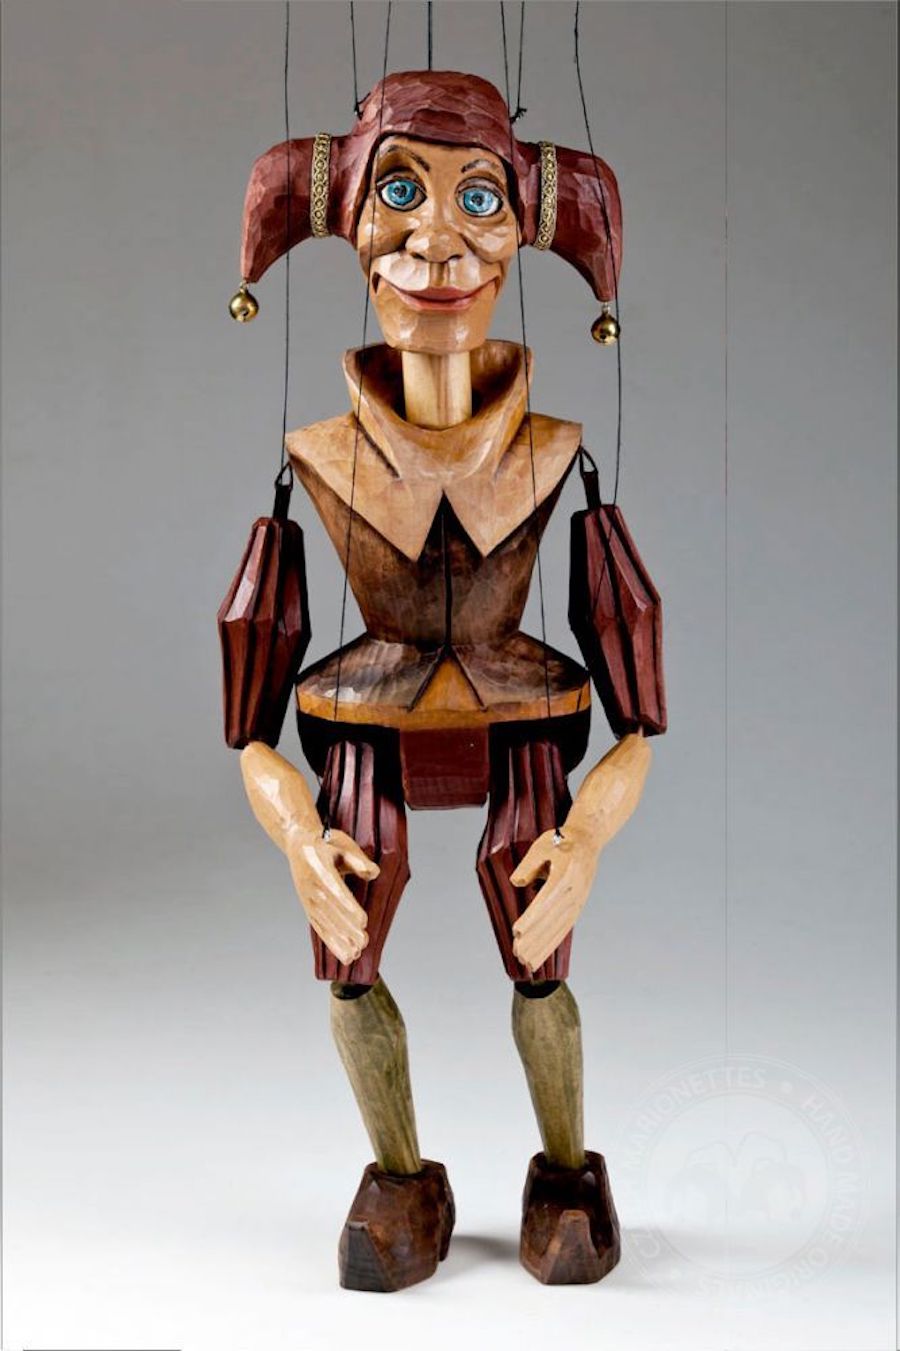 Czech-Marionettes-5-jester_hand-carved-marionette-puppet.6a89